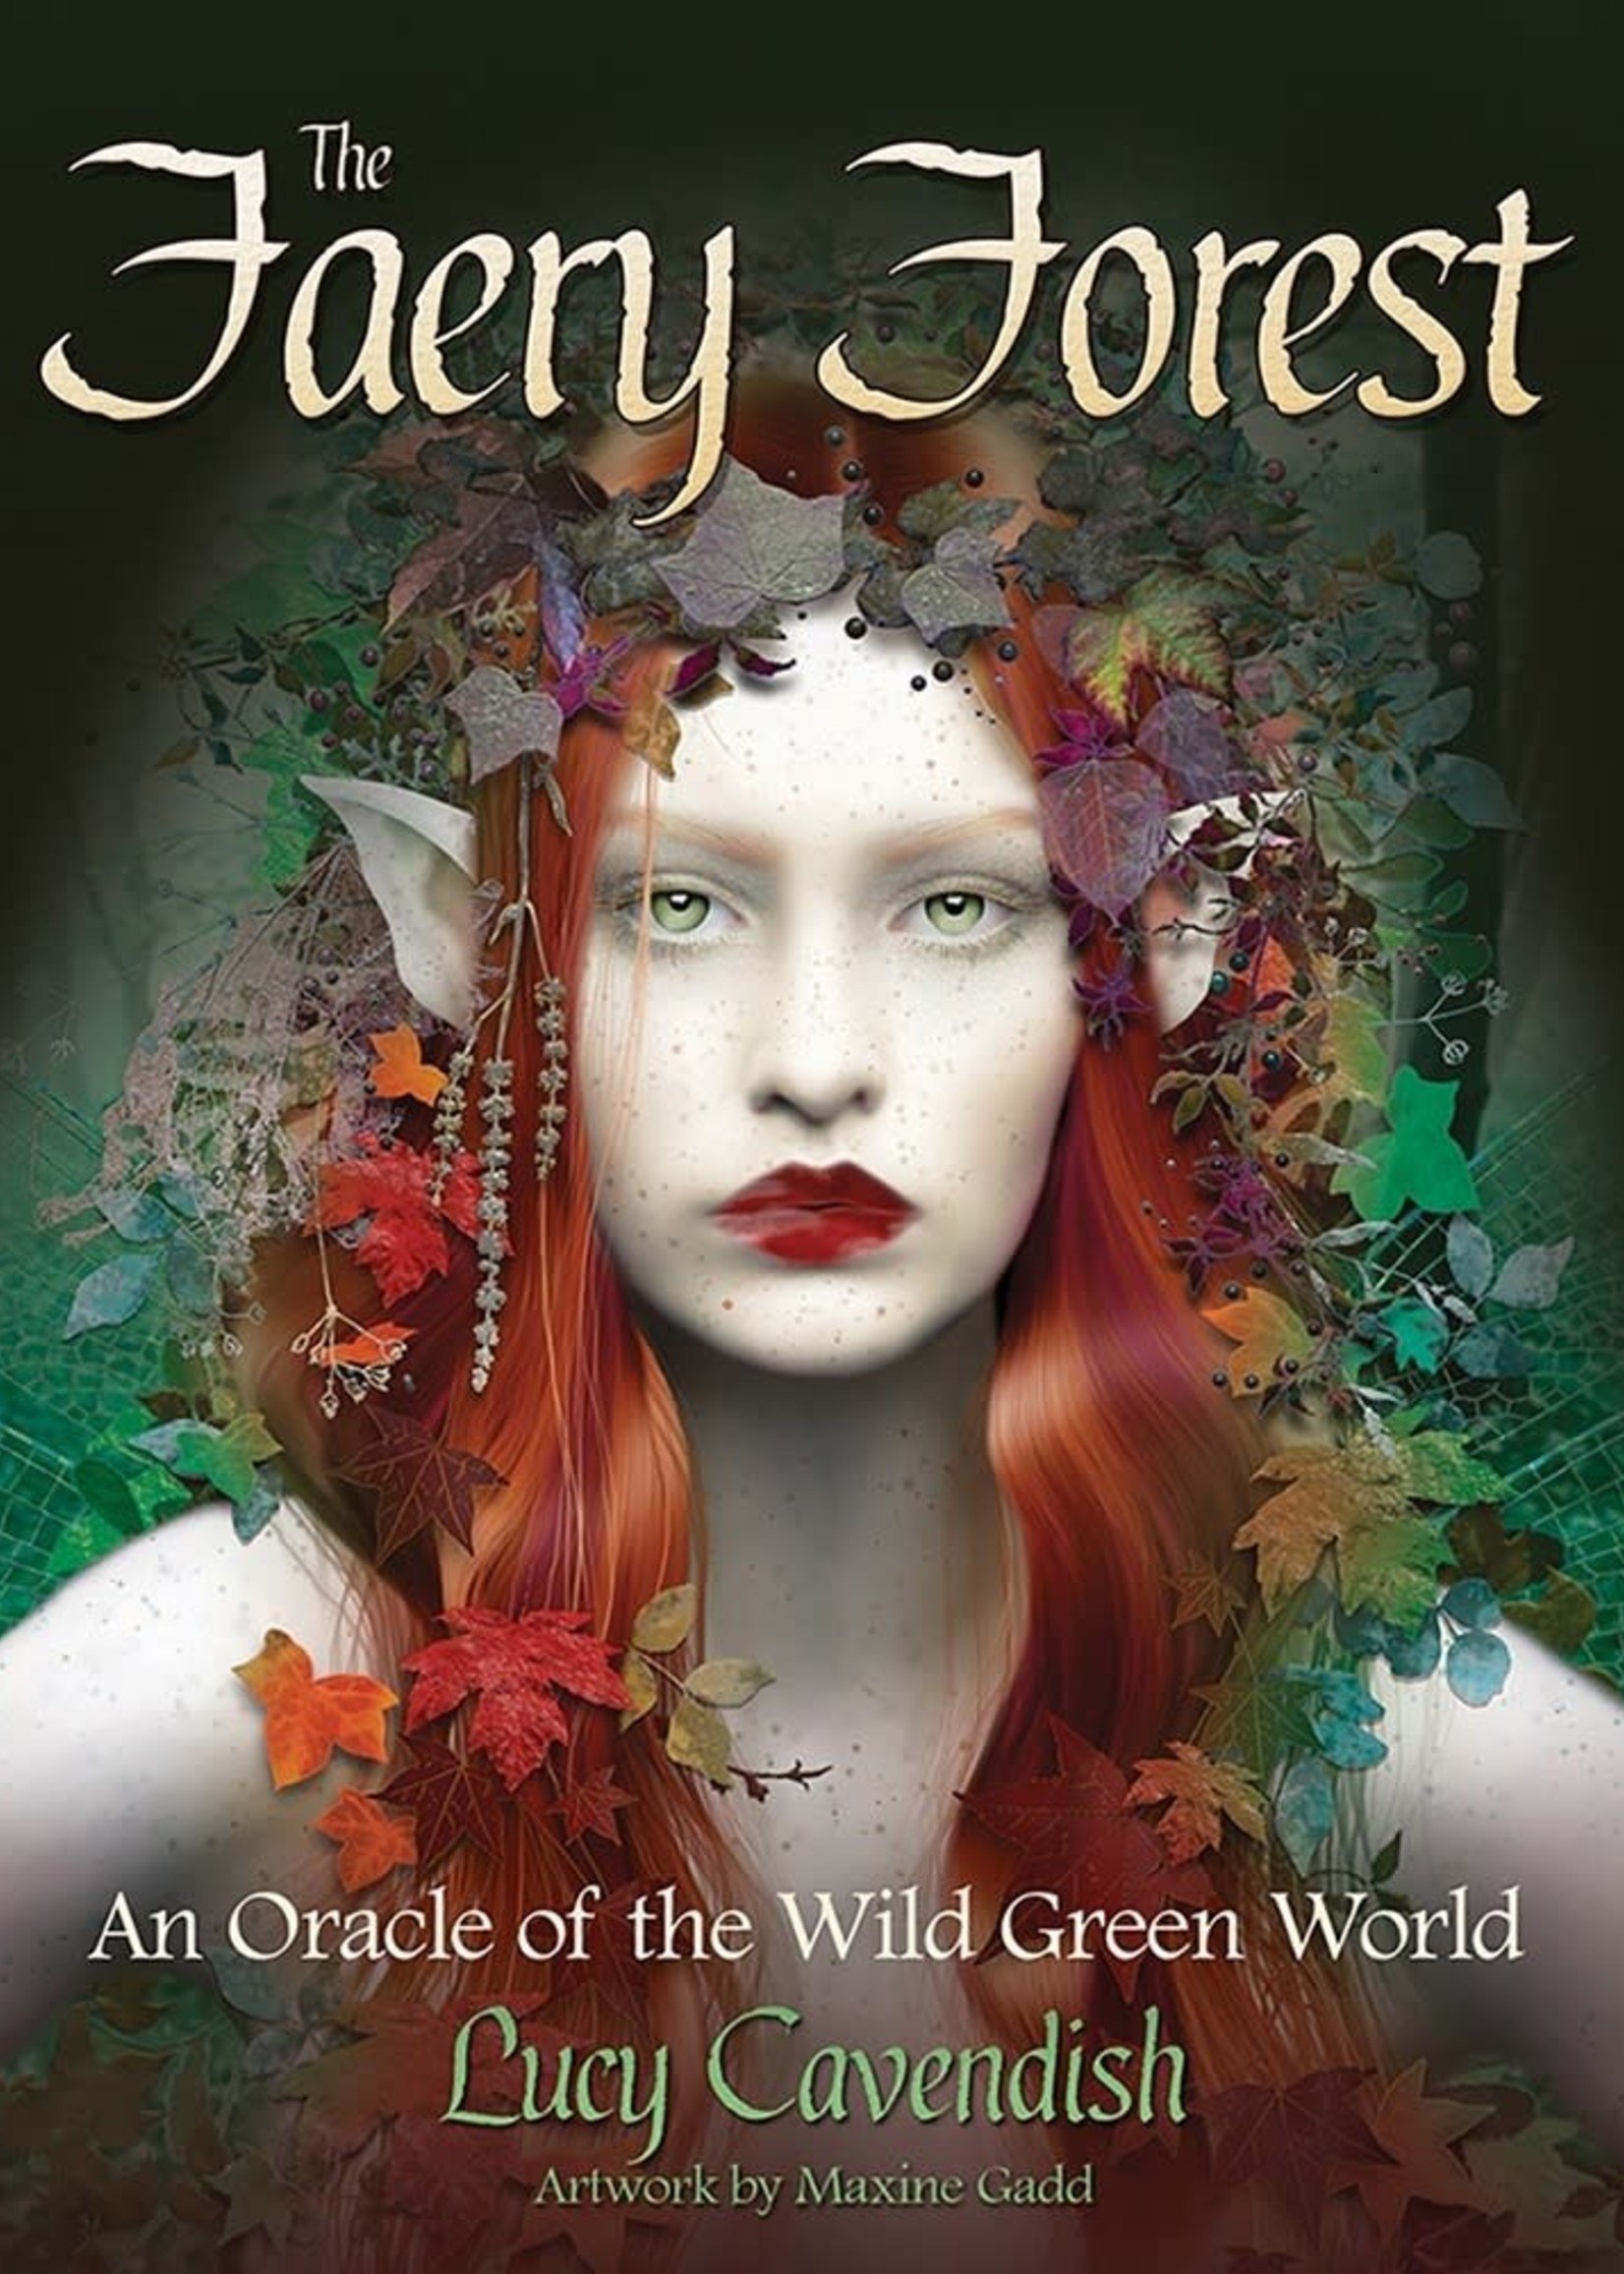 Faery Forest: An Oracle of the Wild Green World